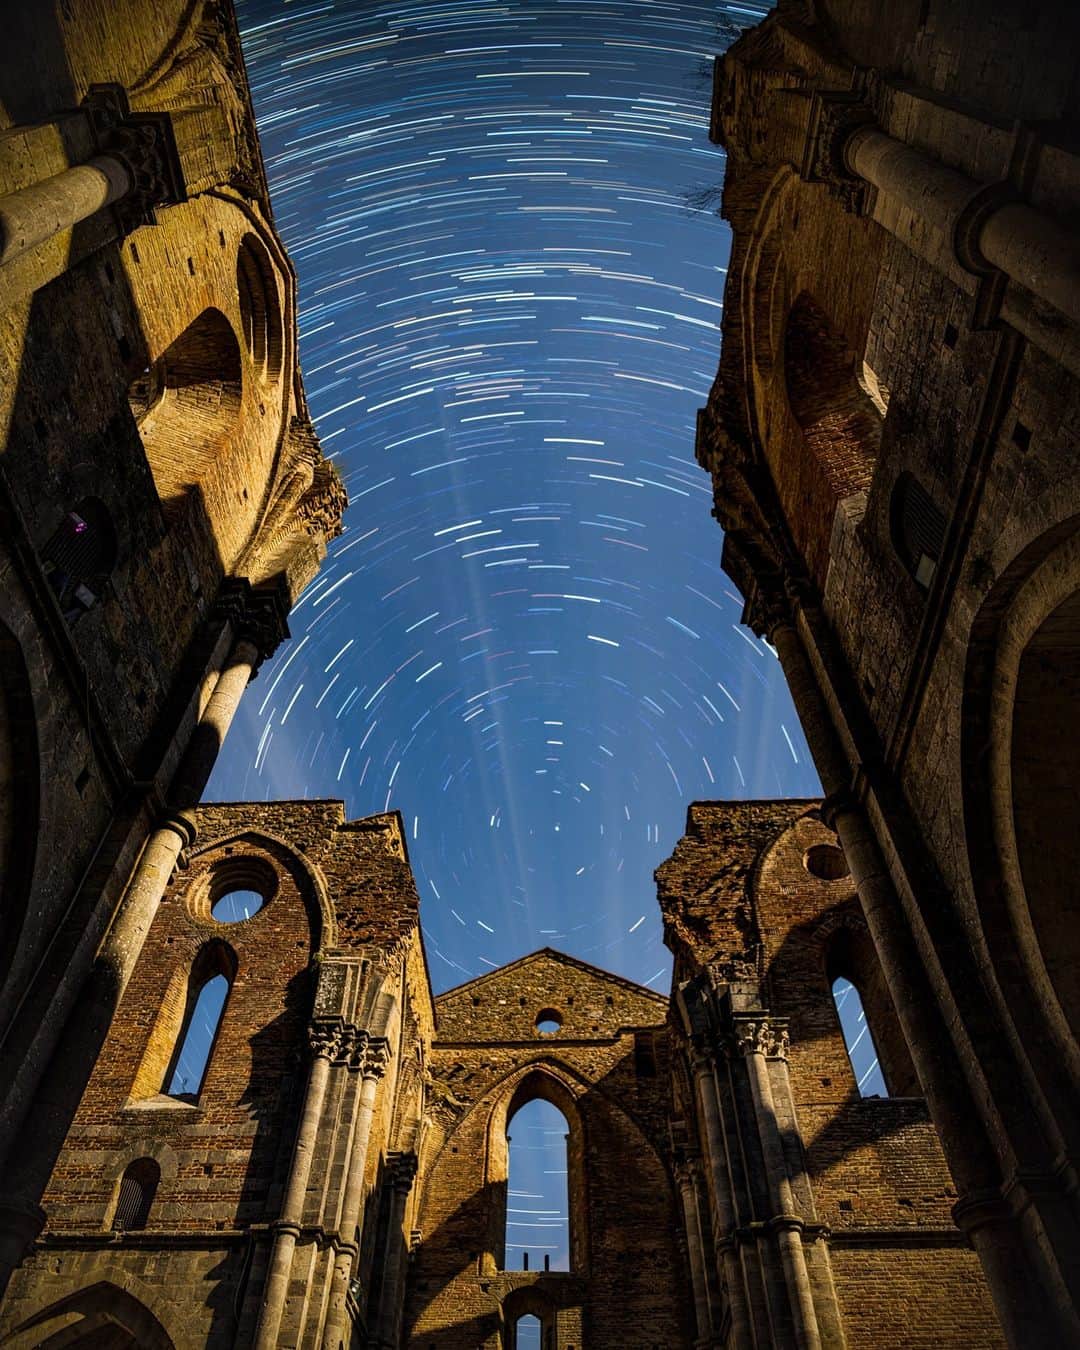 National Geographic Travelのインスタグラム：「Photo by @babaktafreshi | On a moonlit night in Italy, star trails rotate above the roofless Abbey of Saint Galgano near Siena, Tuscany. In the 18th century, the unique 13th-century Gothic-style abbey was hit by a lightning bolt, which caused the bell tower to fall onto the church, destroying the roof. In this long-exposure image, Earth’s rotation causes star trails around the north celestial pole (marked by Polaris).」